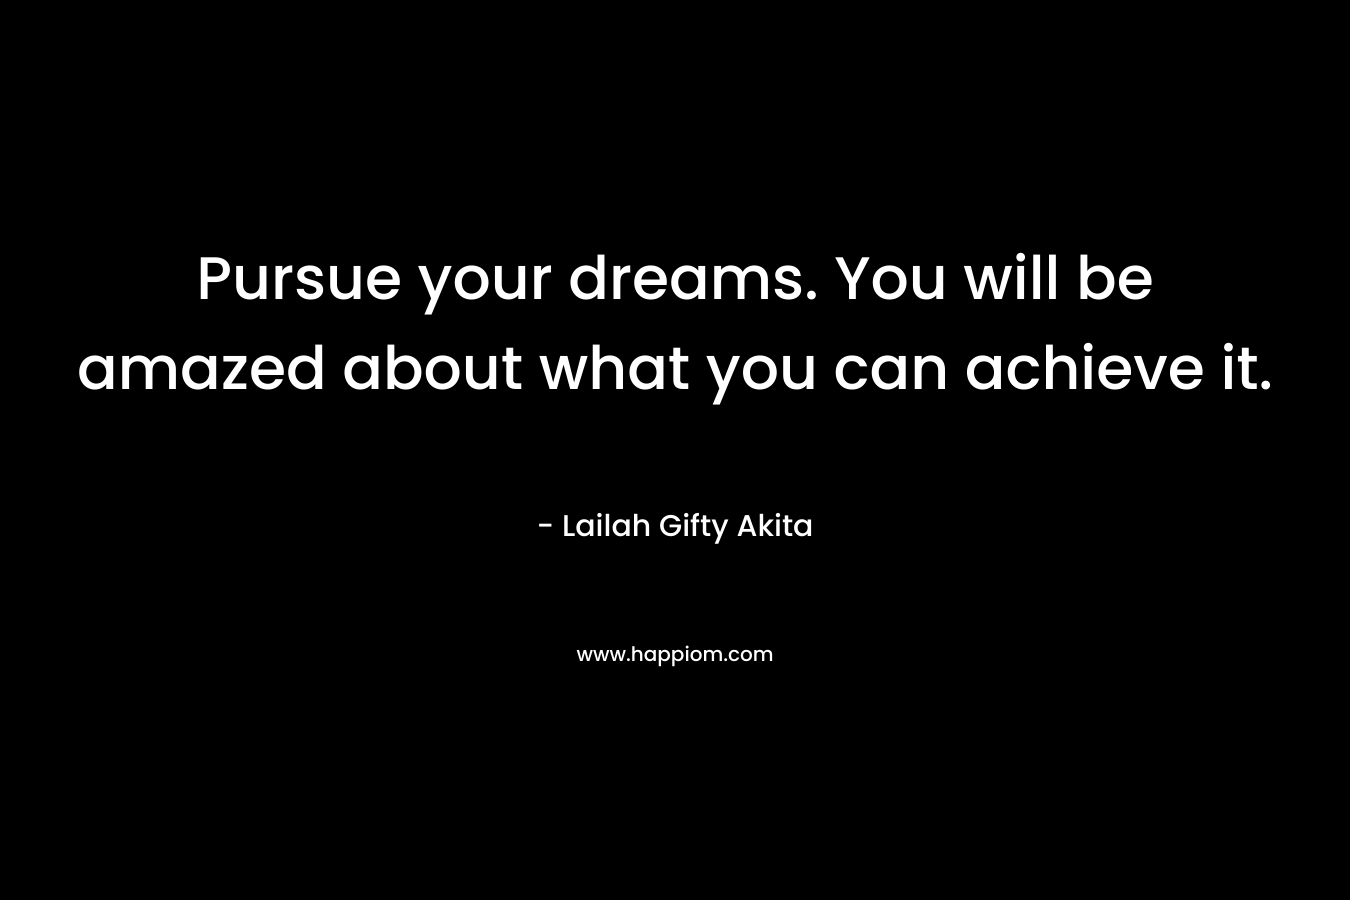 Pursue your dreams. You will be amazed about what you can achieve it.